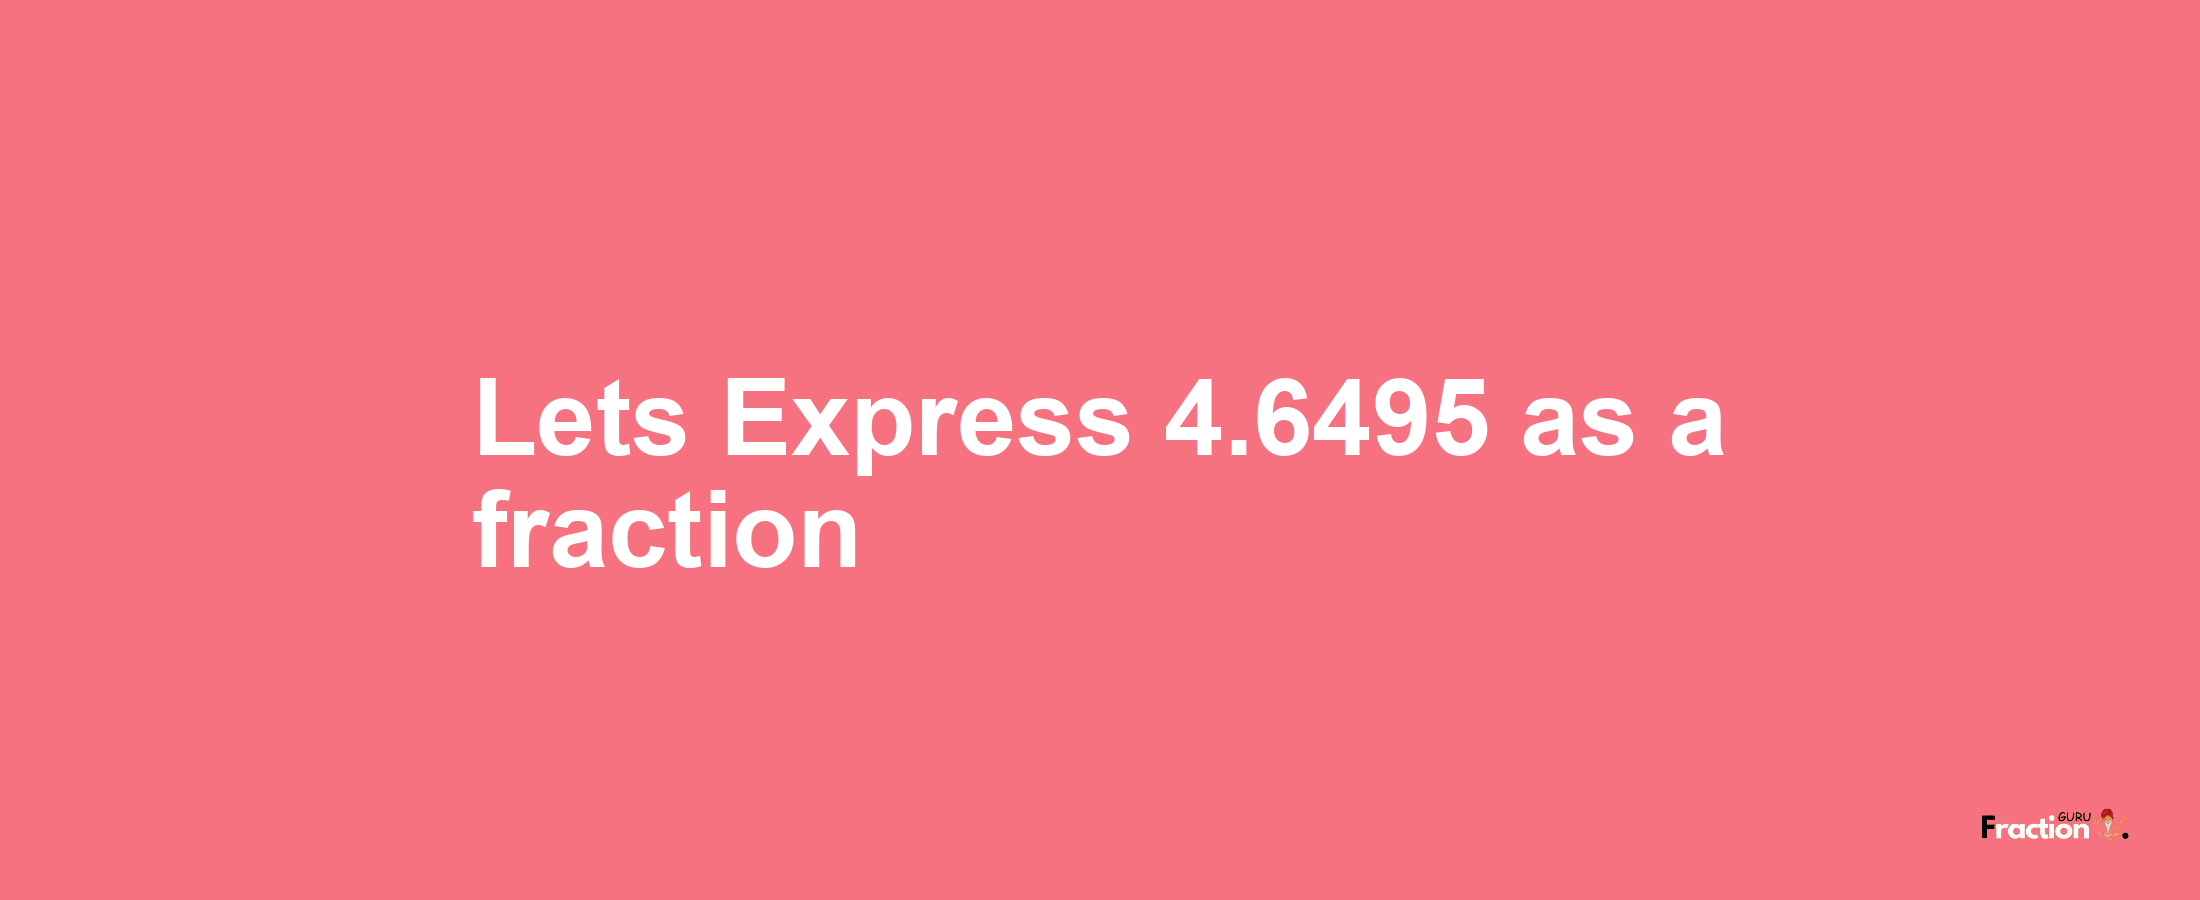 Lets Express 4.6495 as afraction